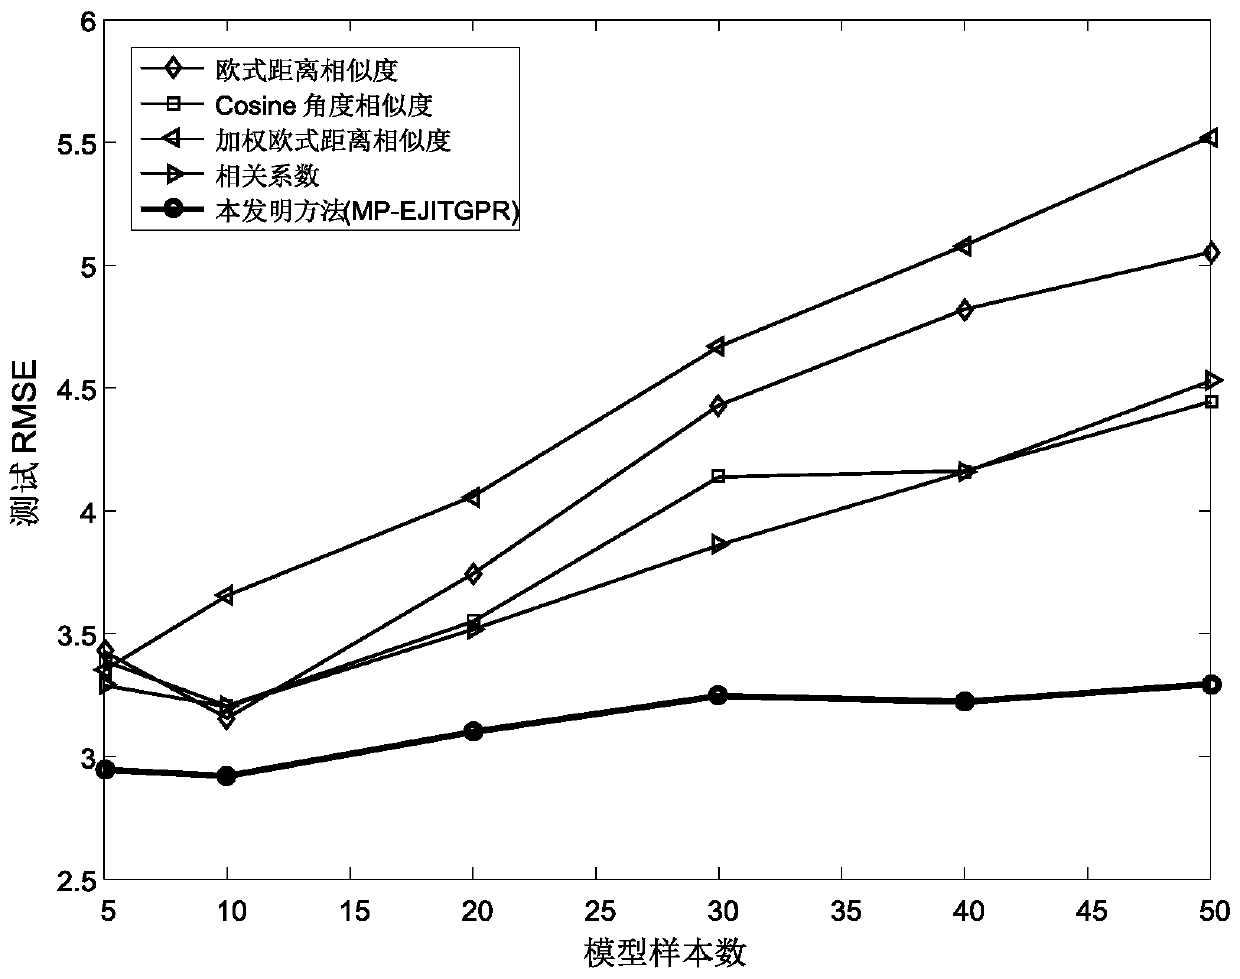 Industrial rubber compound Mooney viscosity soft measurement method based on integrated immediate learning